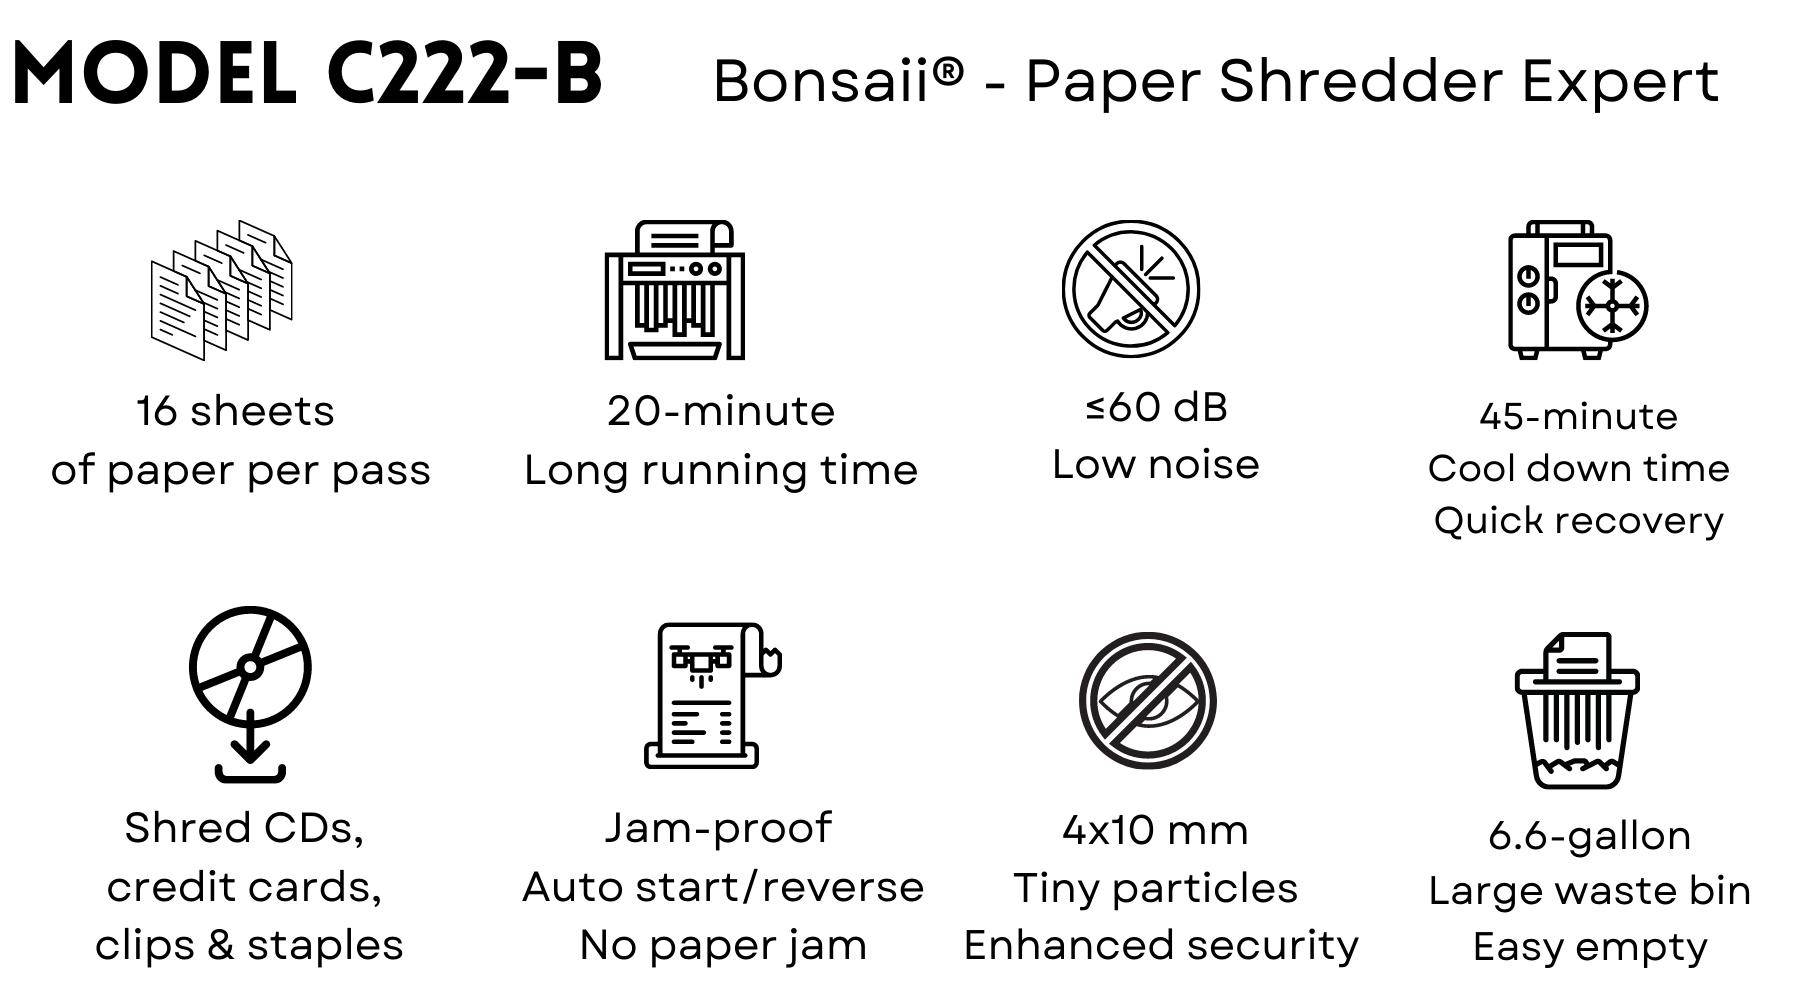 Bonsaii 222-B paper shredder helps people cut paper into tiny fine particles. Government organizations, businesses, and private individuals use shredders to destroy private, confidential, or otherwise sensitive documents.  Shredding paper helps to keep us in compliance with the law, to protect forests, to prevent identity theft, and to rid clutter and fire hazards. They provide a Confidential Waste Disposal service and enable paper shredding, document shredding, document destruction and Shredders which are reliable and secure.  Shredders usually either cut the paper into strips or confetti-like squares. When paper (or another object) touches the cutting head, a sensor activates and the sharp teeth or knives rotate and pull the paper into their jaws until the paper lies pathetically in pieces in the bin.  Bonsaii 222-B paper shredder's main features:  20 minutes of continuous running time before a cool down period is needed allowing you to complete shredding jobs in one sitting Advanced Cooling System and patented Cutting Technology Touch screen control panel for easy operation Micro-cut shreds up to 16 sheets at a single pass, and turn the papers into tiny micro-cut particles measuring 5/32 x15/32 inches (4 x 10mm) P-4 high-security level Shreds credit cards, CDs, DVDs, small paper clips and staples 60 dB low noise, quiet and smooth shredding  4 removable and lockable casters for great mobility Auto-start and auto-reverse functions avoid paper jams Overheat and overload protection technology keep your shredder in a good condition and extend its lifespan  6.6-gallon pull-out waste bin for less frequency of emptying, check the fullness of the bin through the built-in transparent window  Free shipping in the United States 30-day return, 36-month machine, 7-year cutter warranty Guaranteed safe checkout with Paypal and other trusted payments Specialized in manufacturing paper shredders since 2005